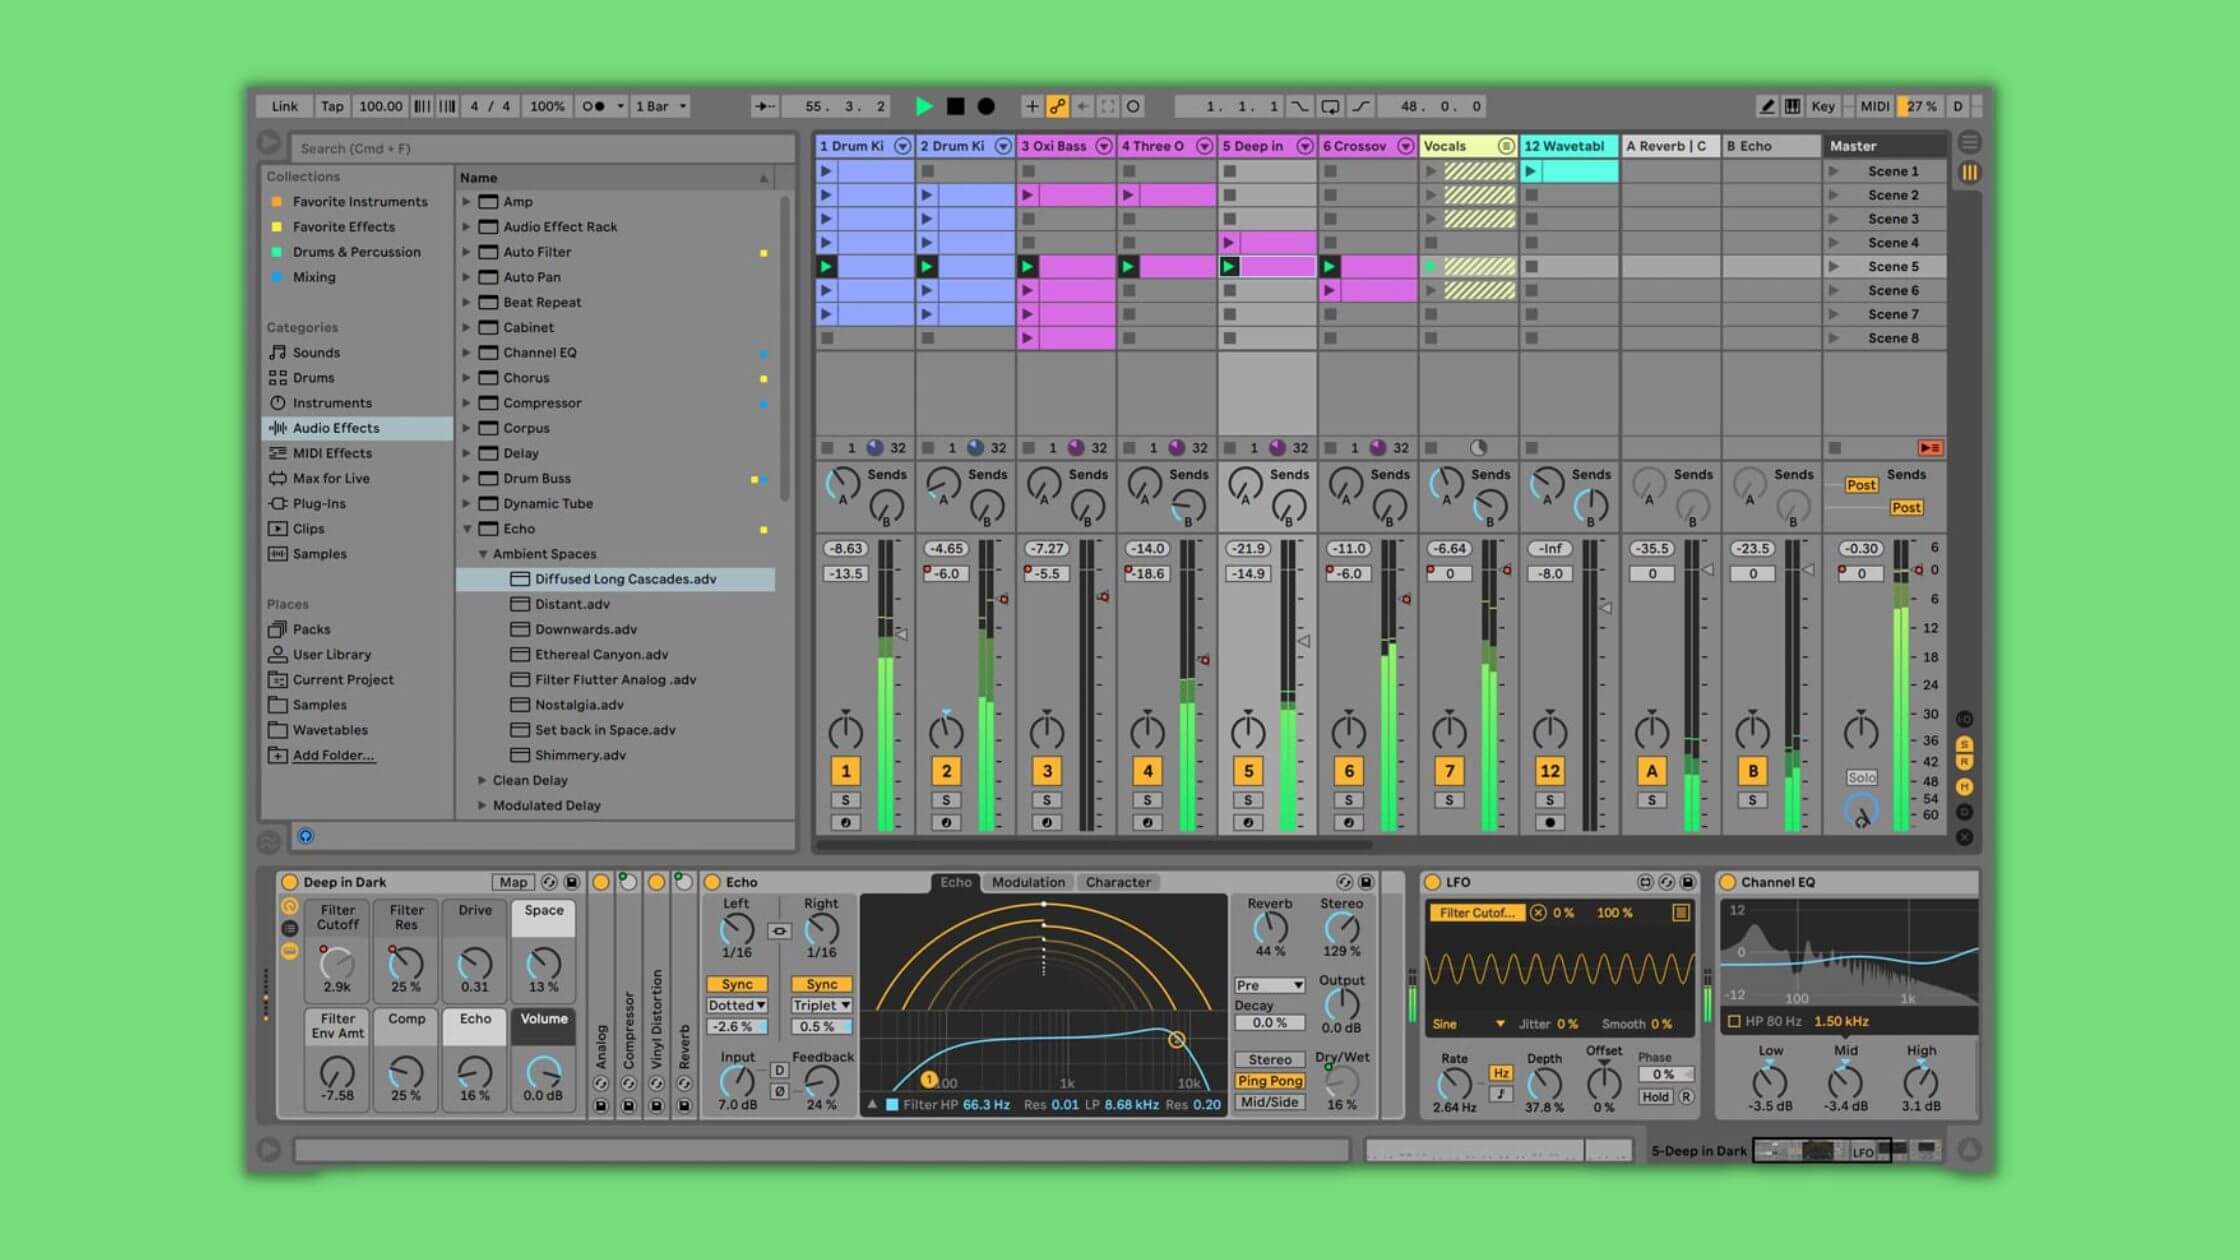 Get Ableton Live 11 Intro, Standard or Suite at a 25% discount until 14th June